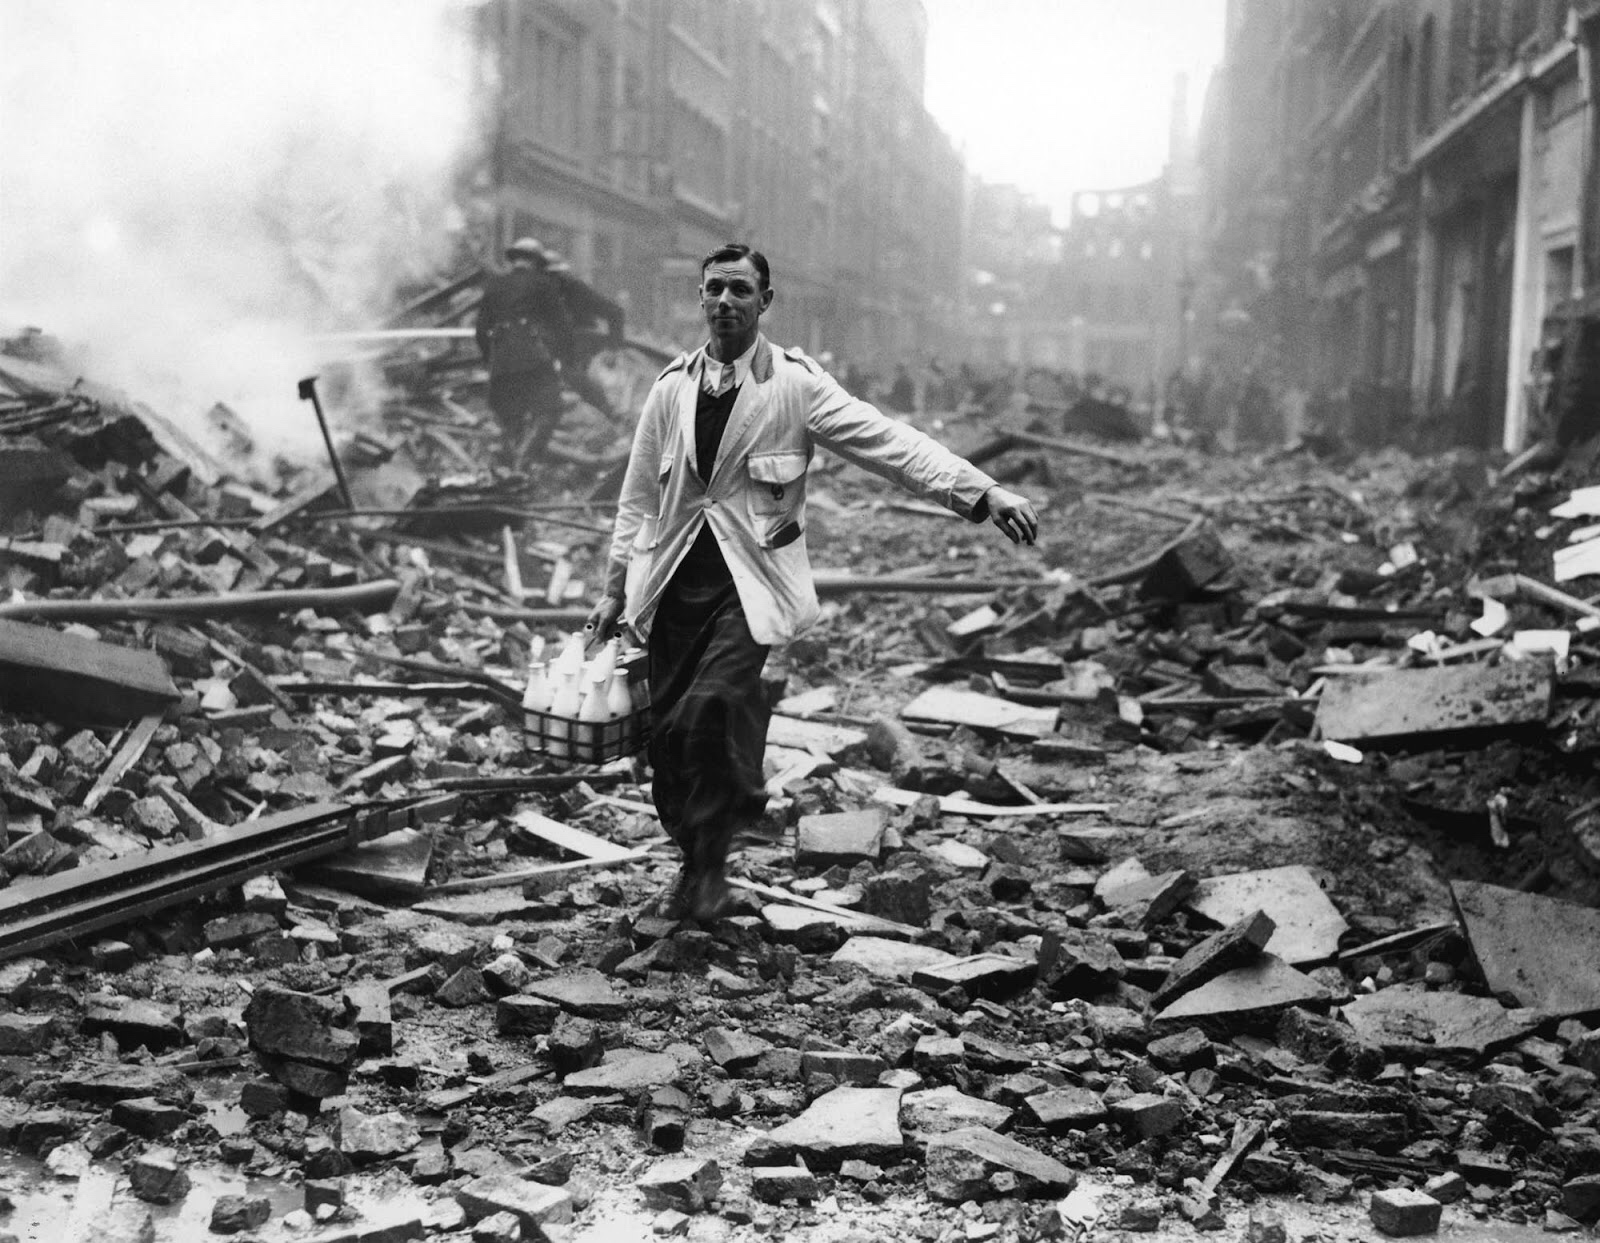 London after bombing, 1940.